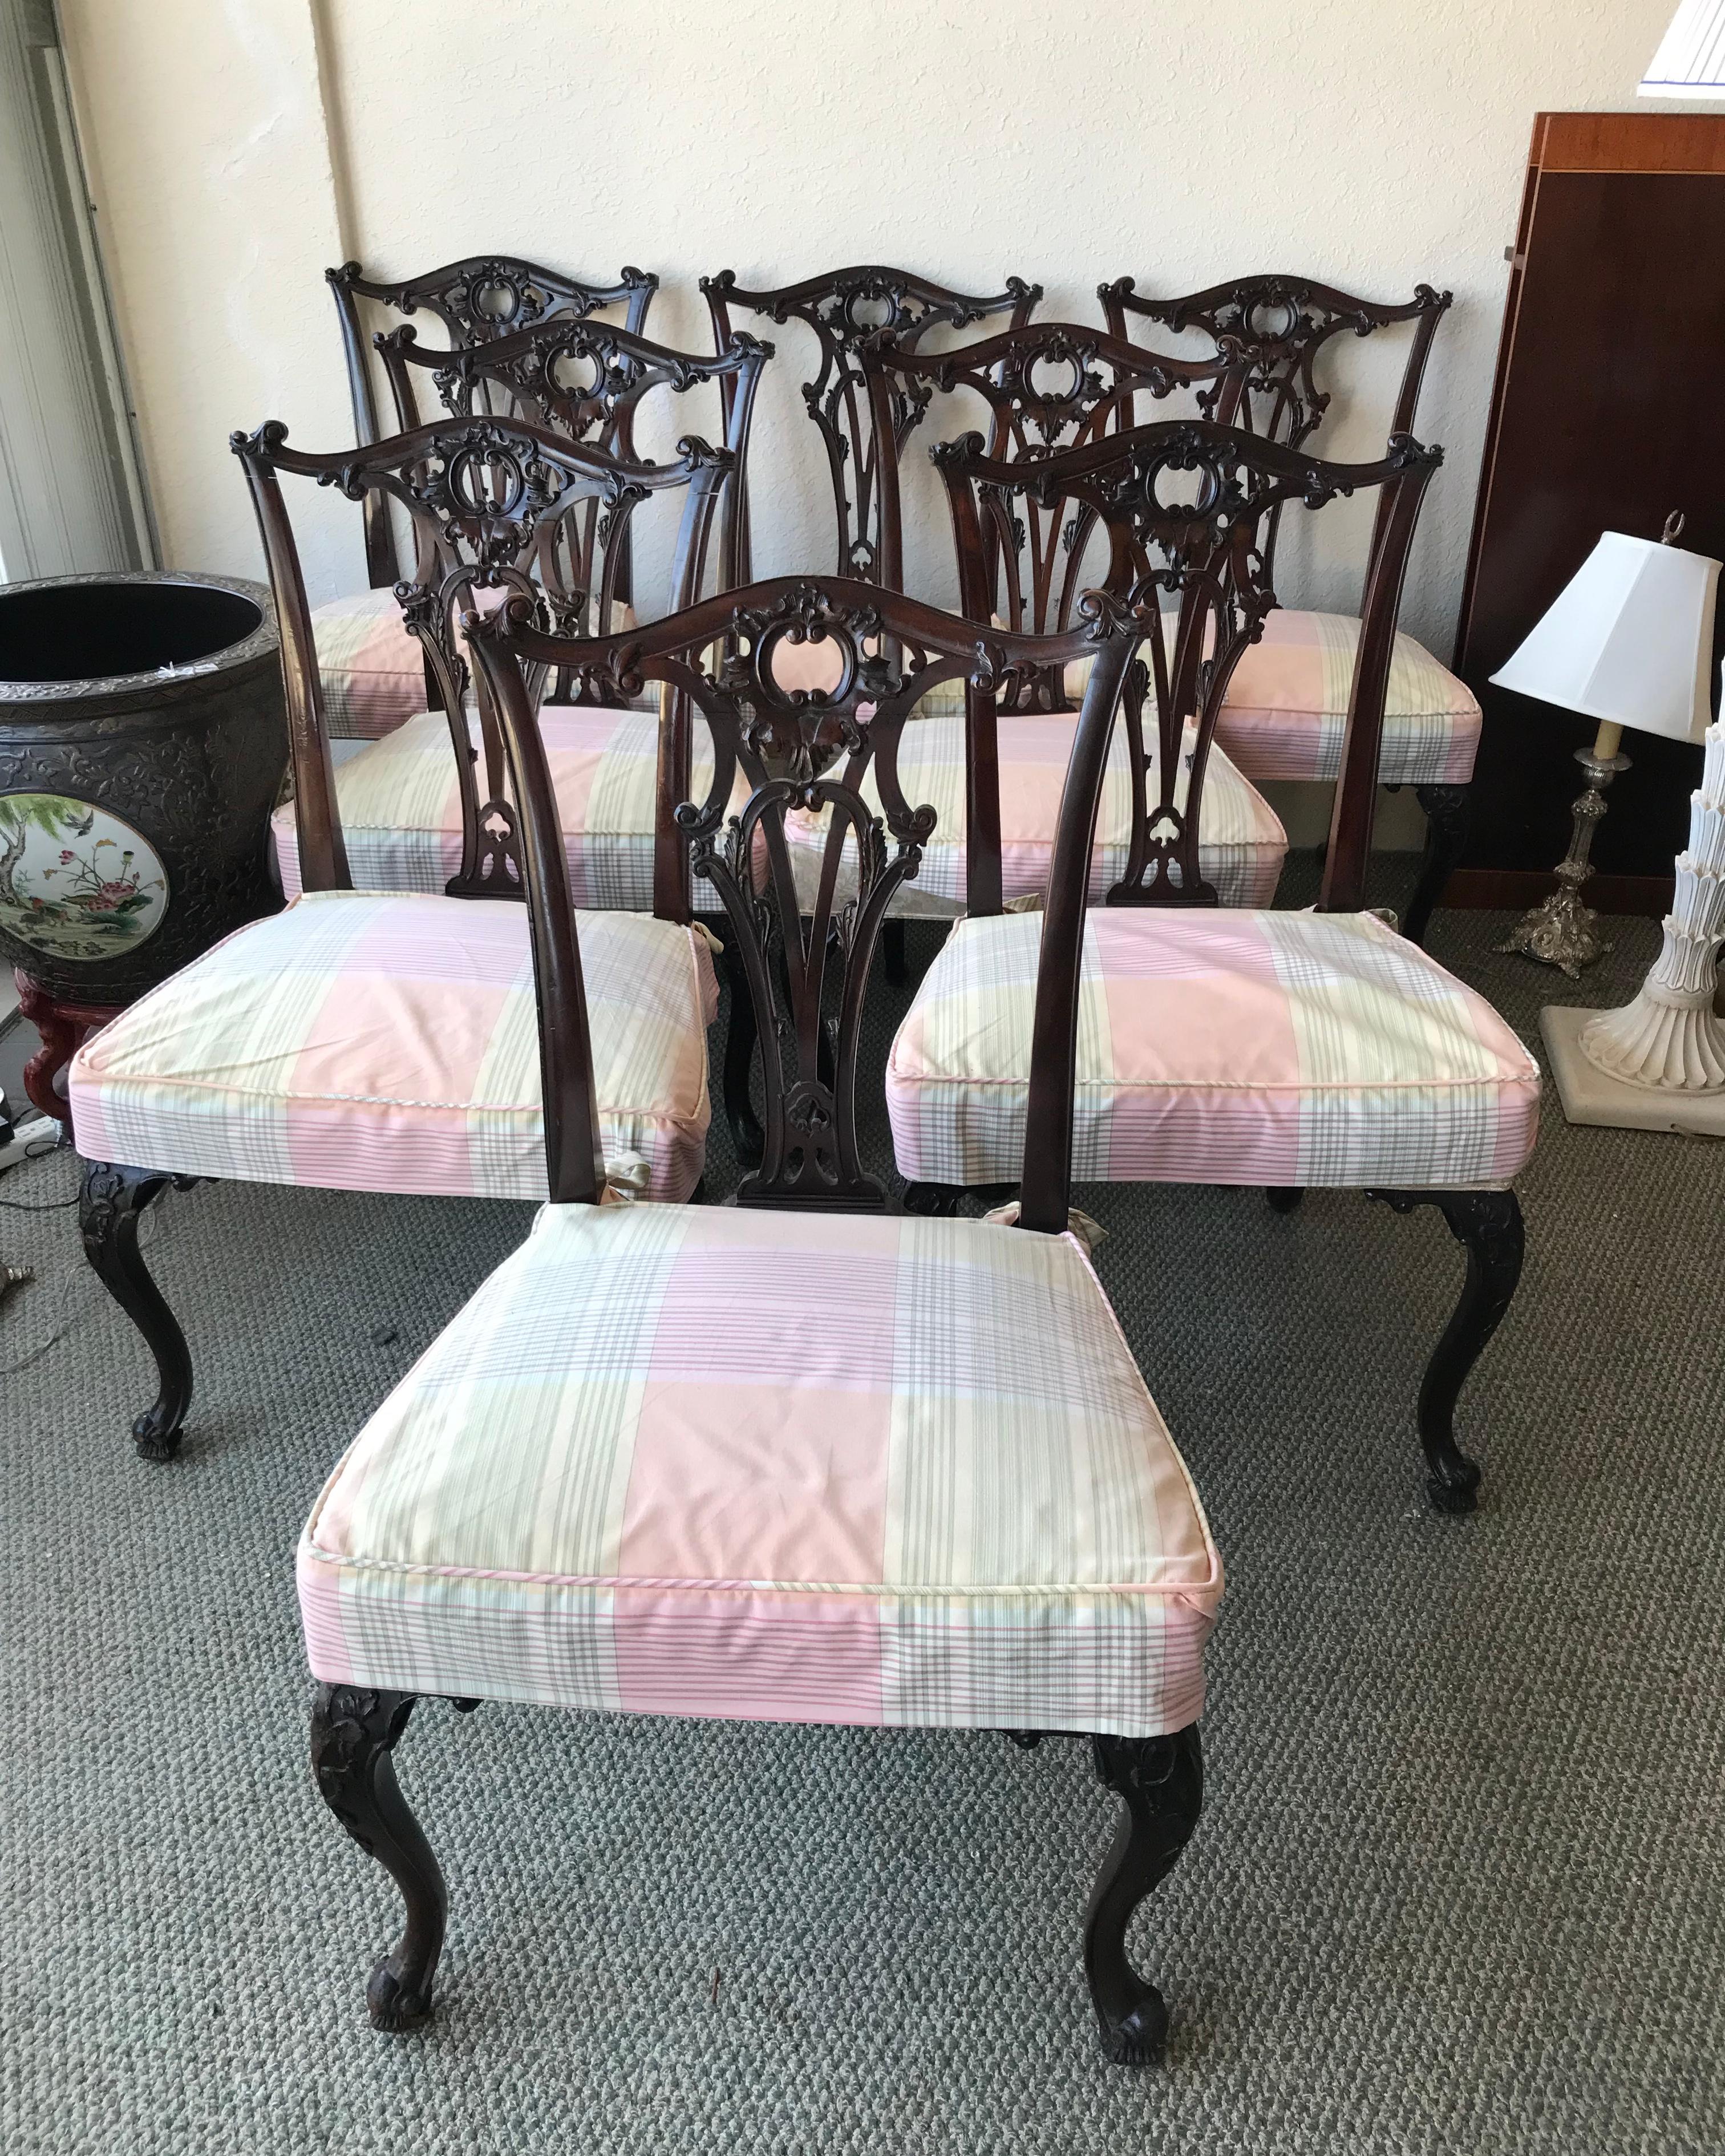 Exquisite and detailed carving. In the Chippendale style.
Rich, deep mahogany. The seats are nice and wide for comfortable
seating and are beautifully upholstered. The chairs terminate in
